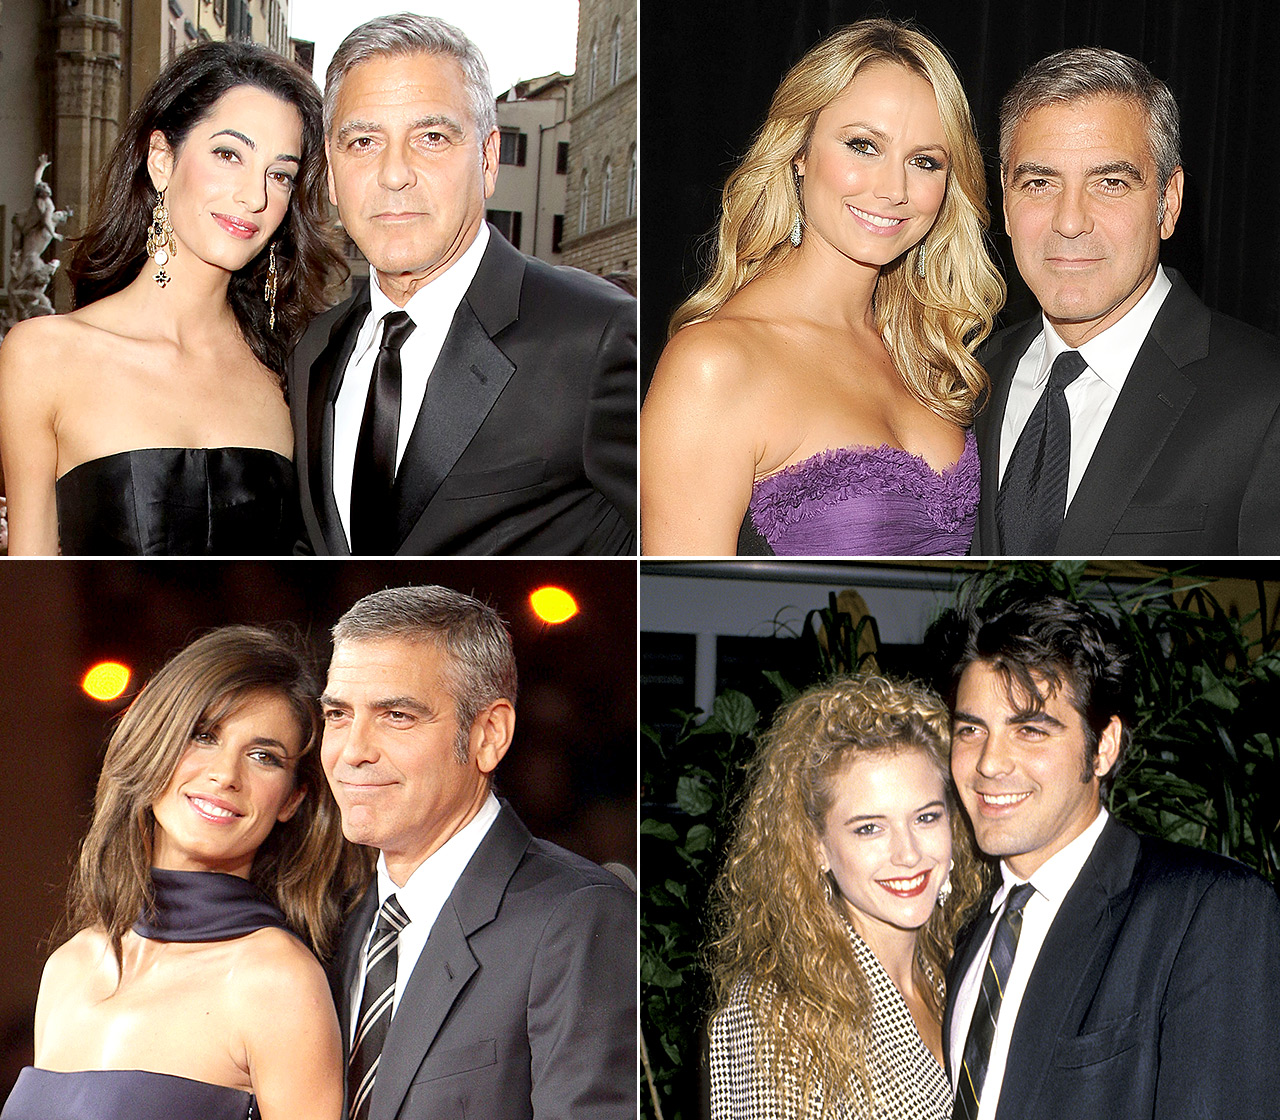 George Clooneys Dating History Timeline of Famous Exes, Girlfriend pic